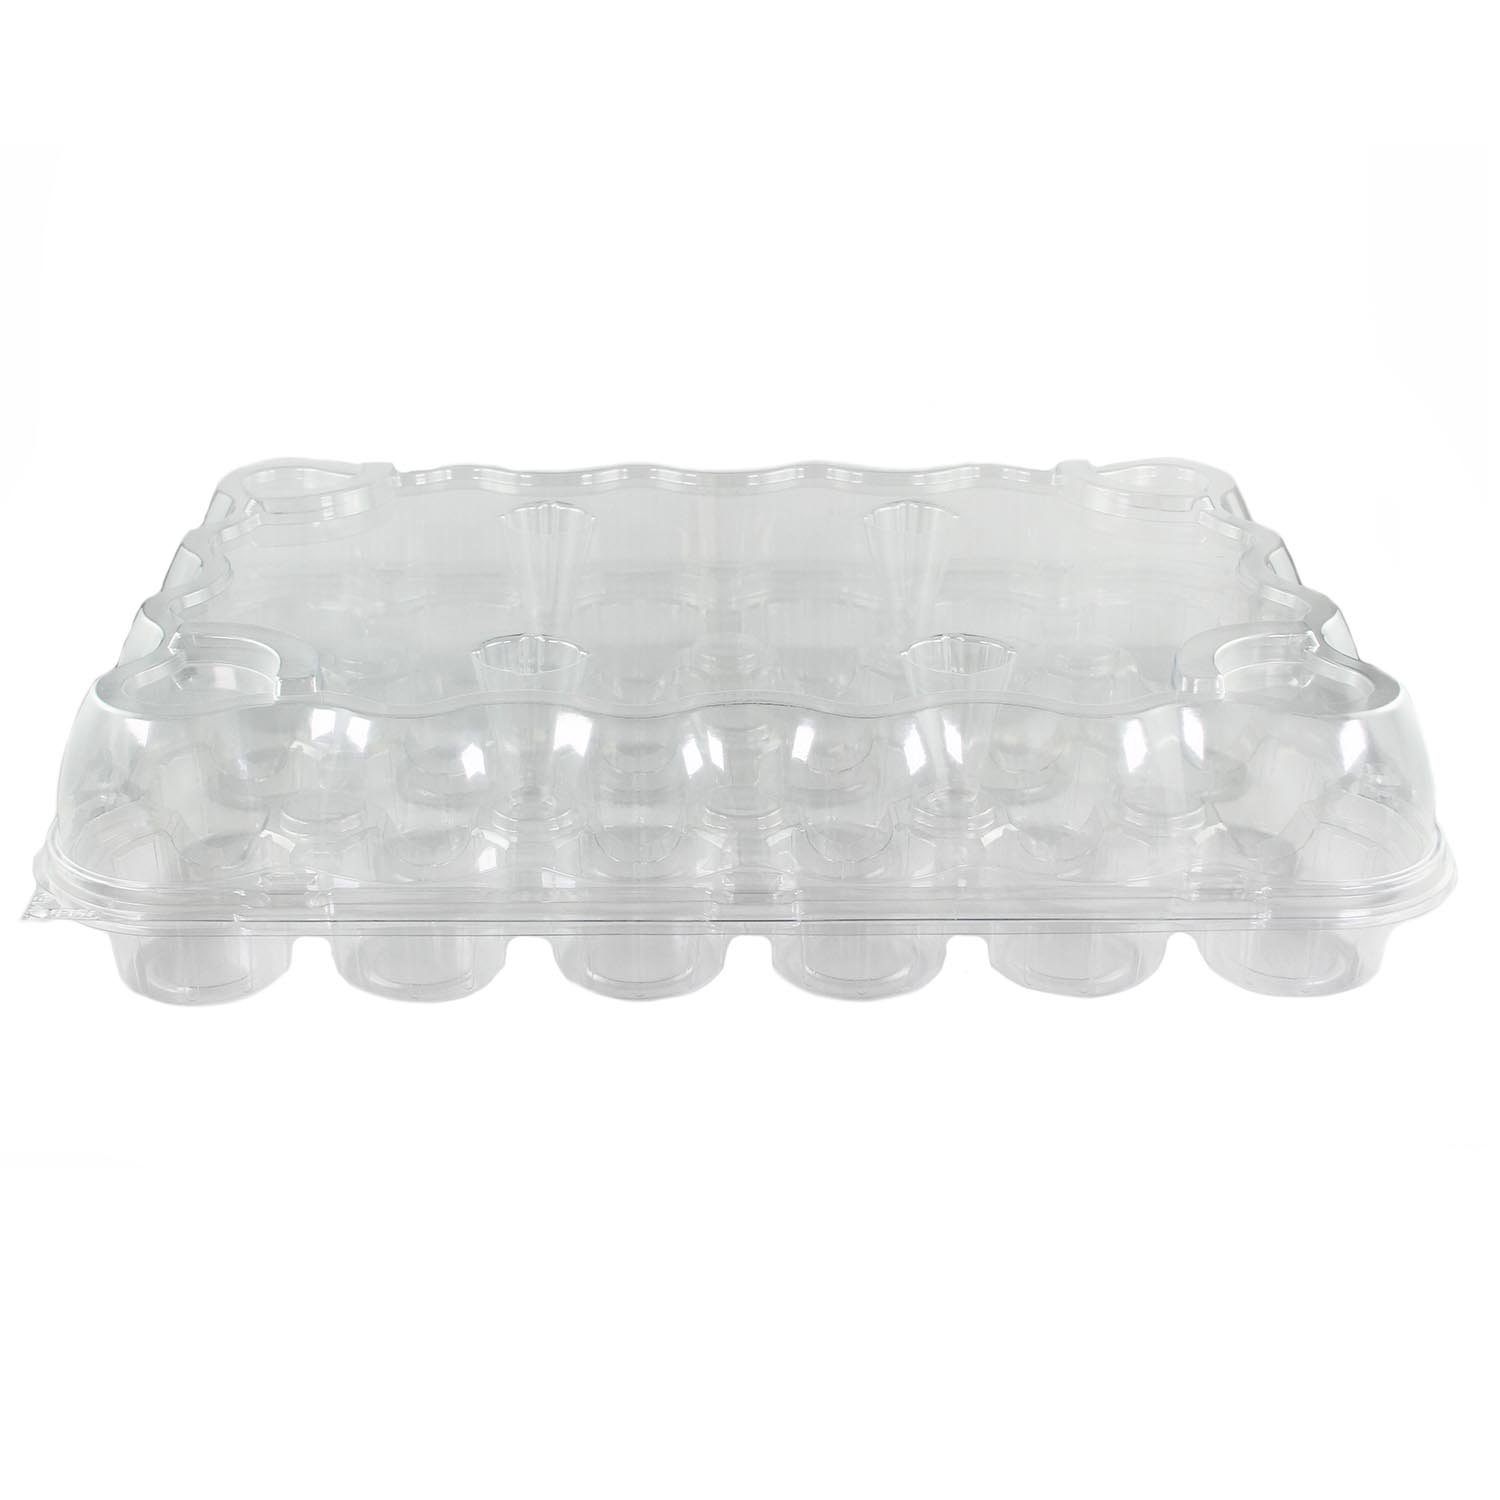 Plastic Container- Holds 24 Standard Size Cupcakes